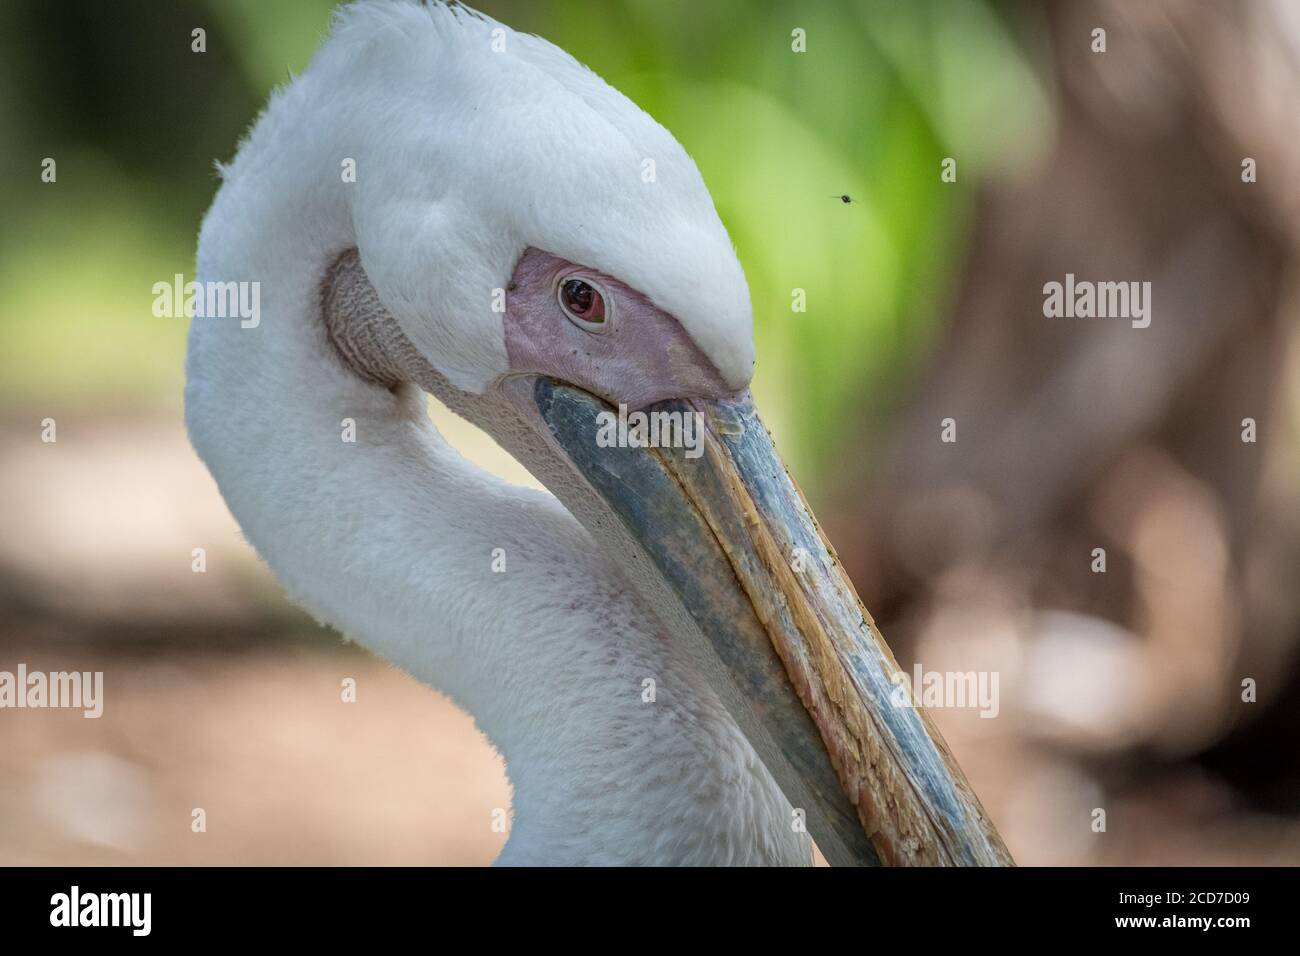 Isolated close up portrait of White Pelican bird- Israel Stock Photo